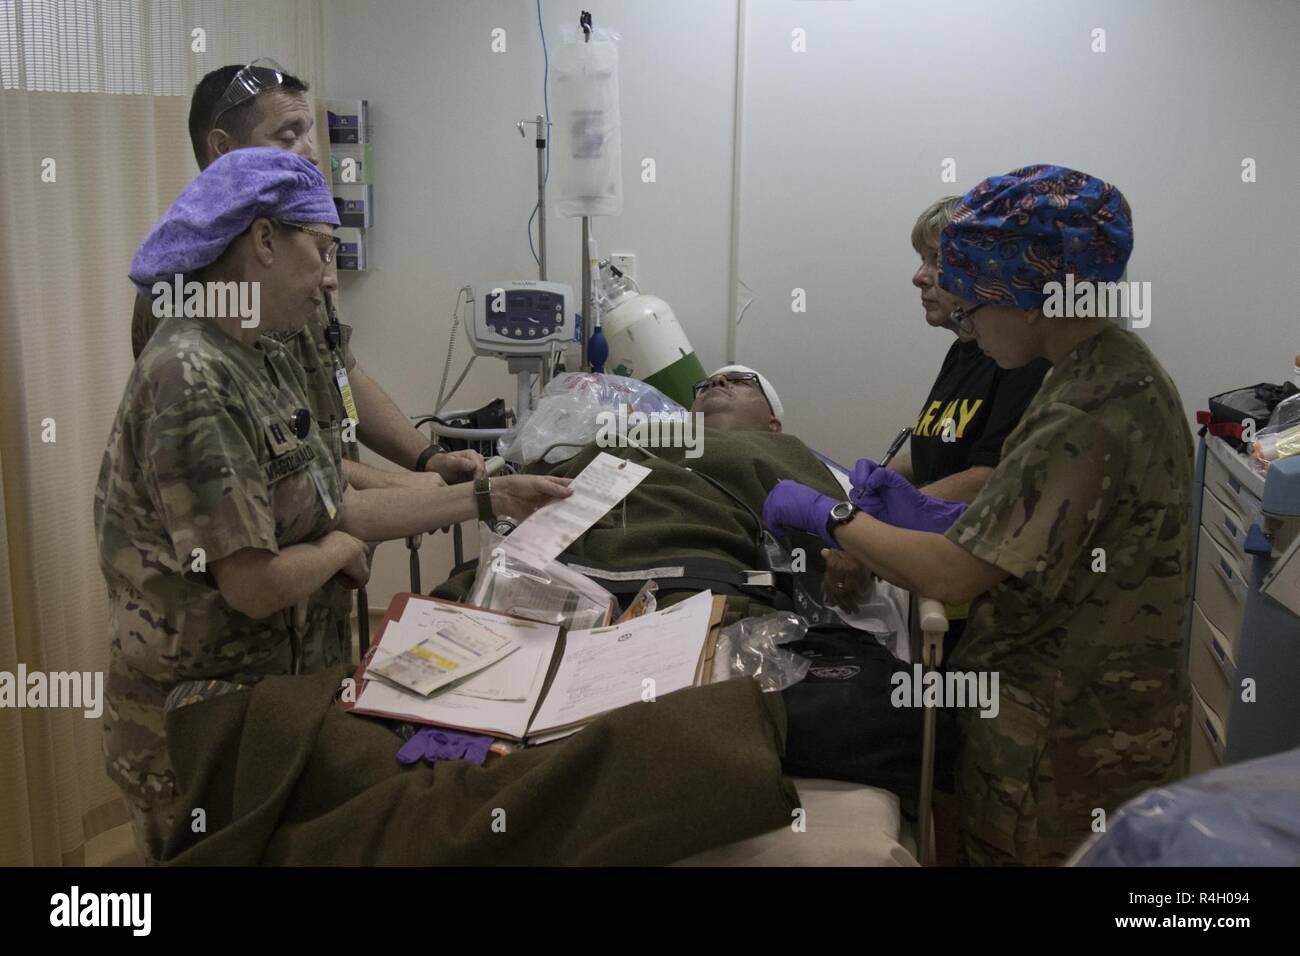 Staff from the 452nd Combat Support Hospital evaluate a casualty's injuries and discuss how to best treat him during a mass casualty exercise at Camp Arifjan, Kuwait, Sept. 26, 2018. The cooperation between first responders and medical personnel are imperative to saving lives Stock Photo